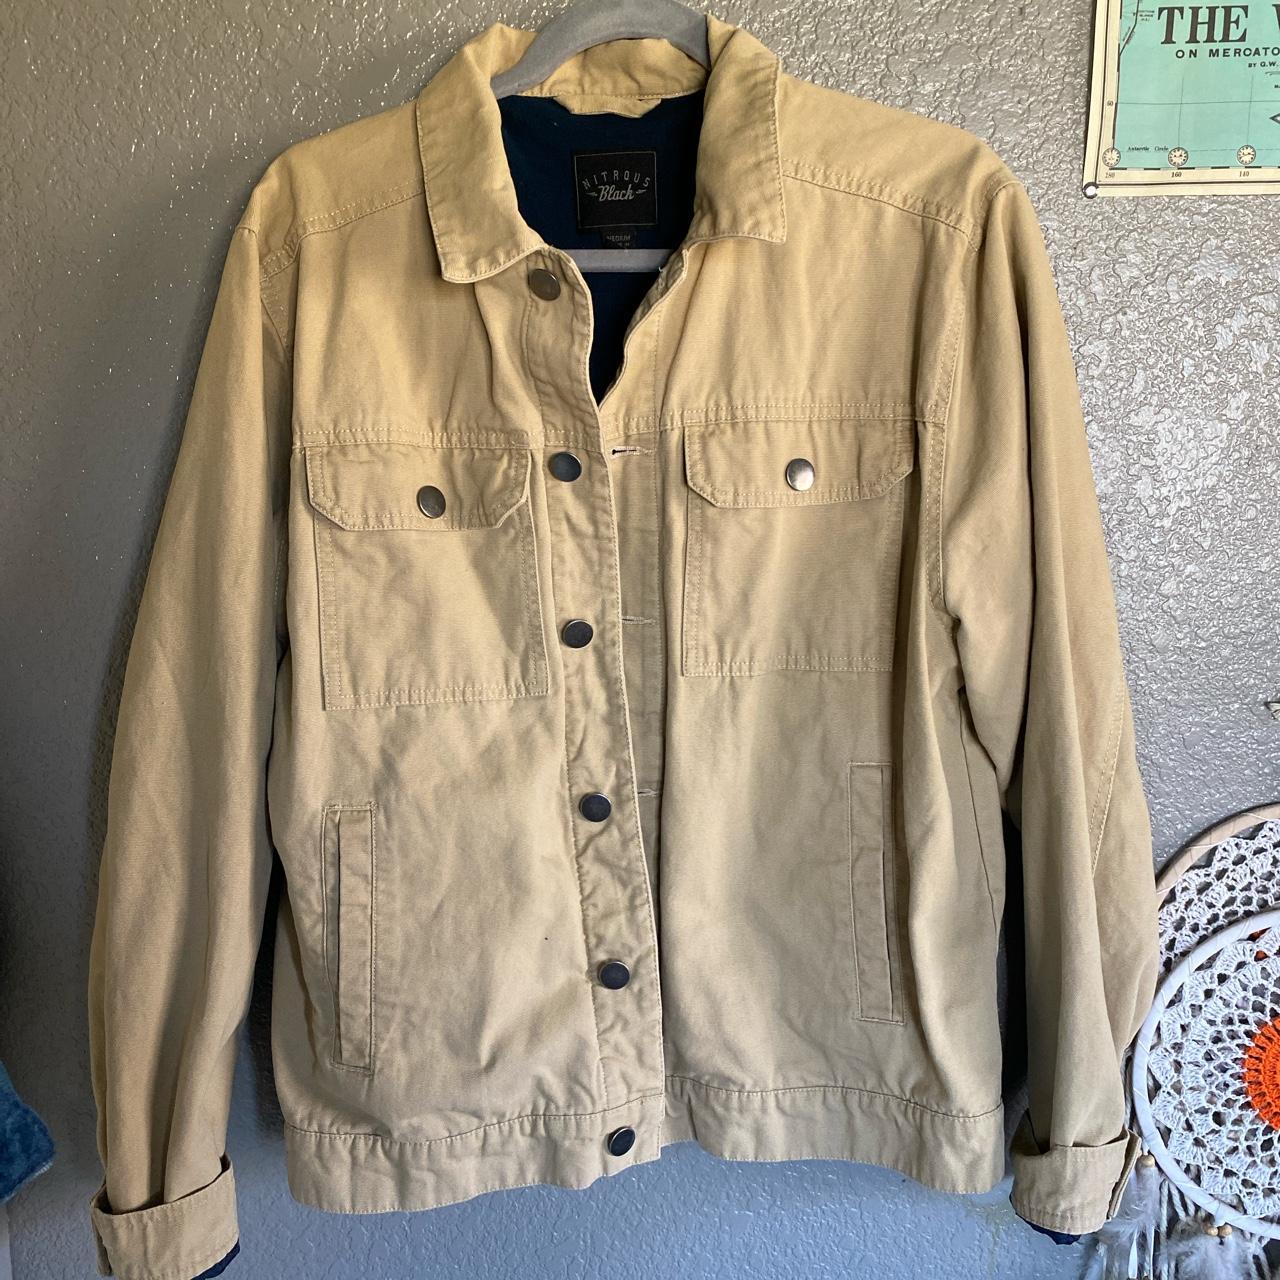 Tan jacket worn once, great condition. bought in... - Depop